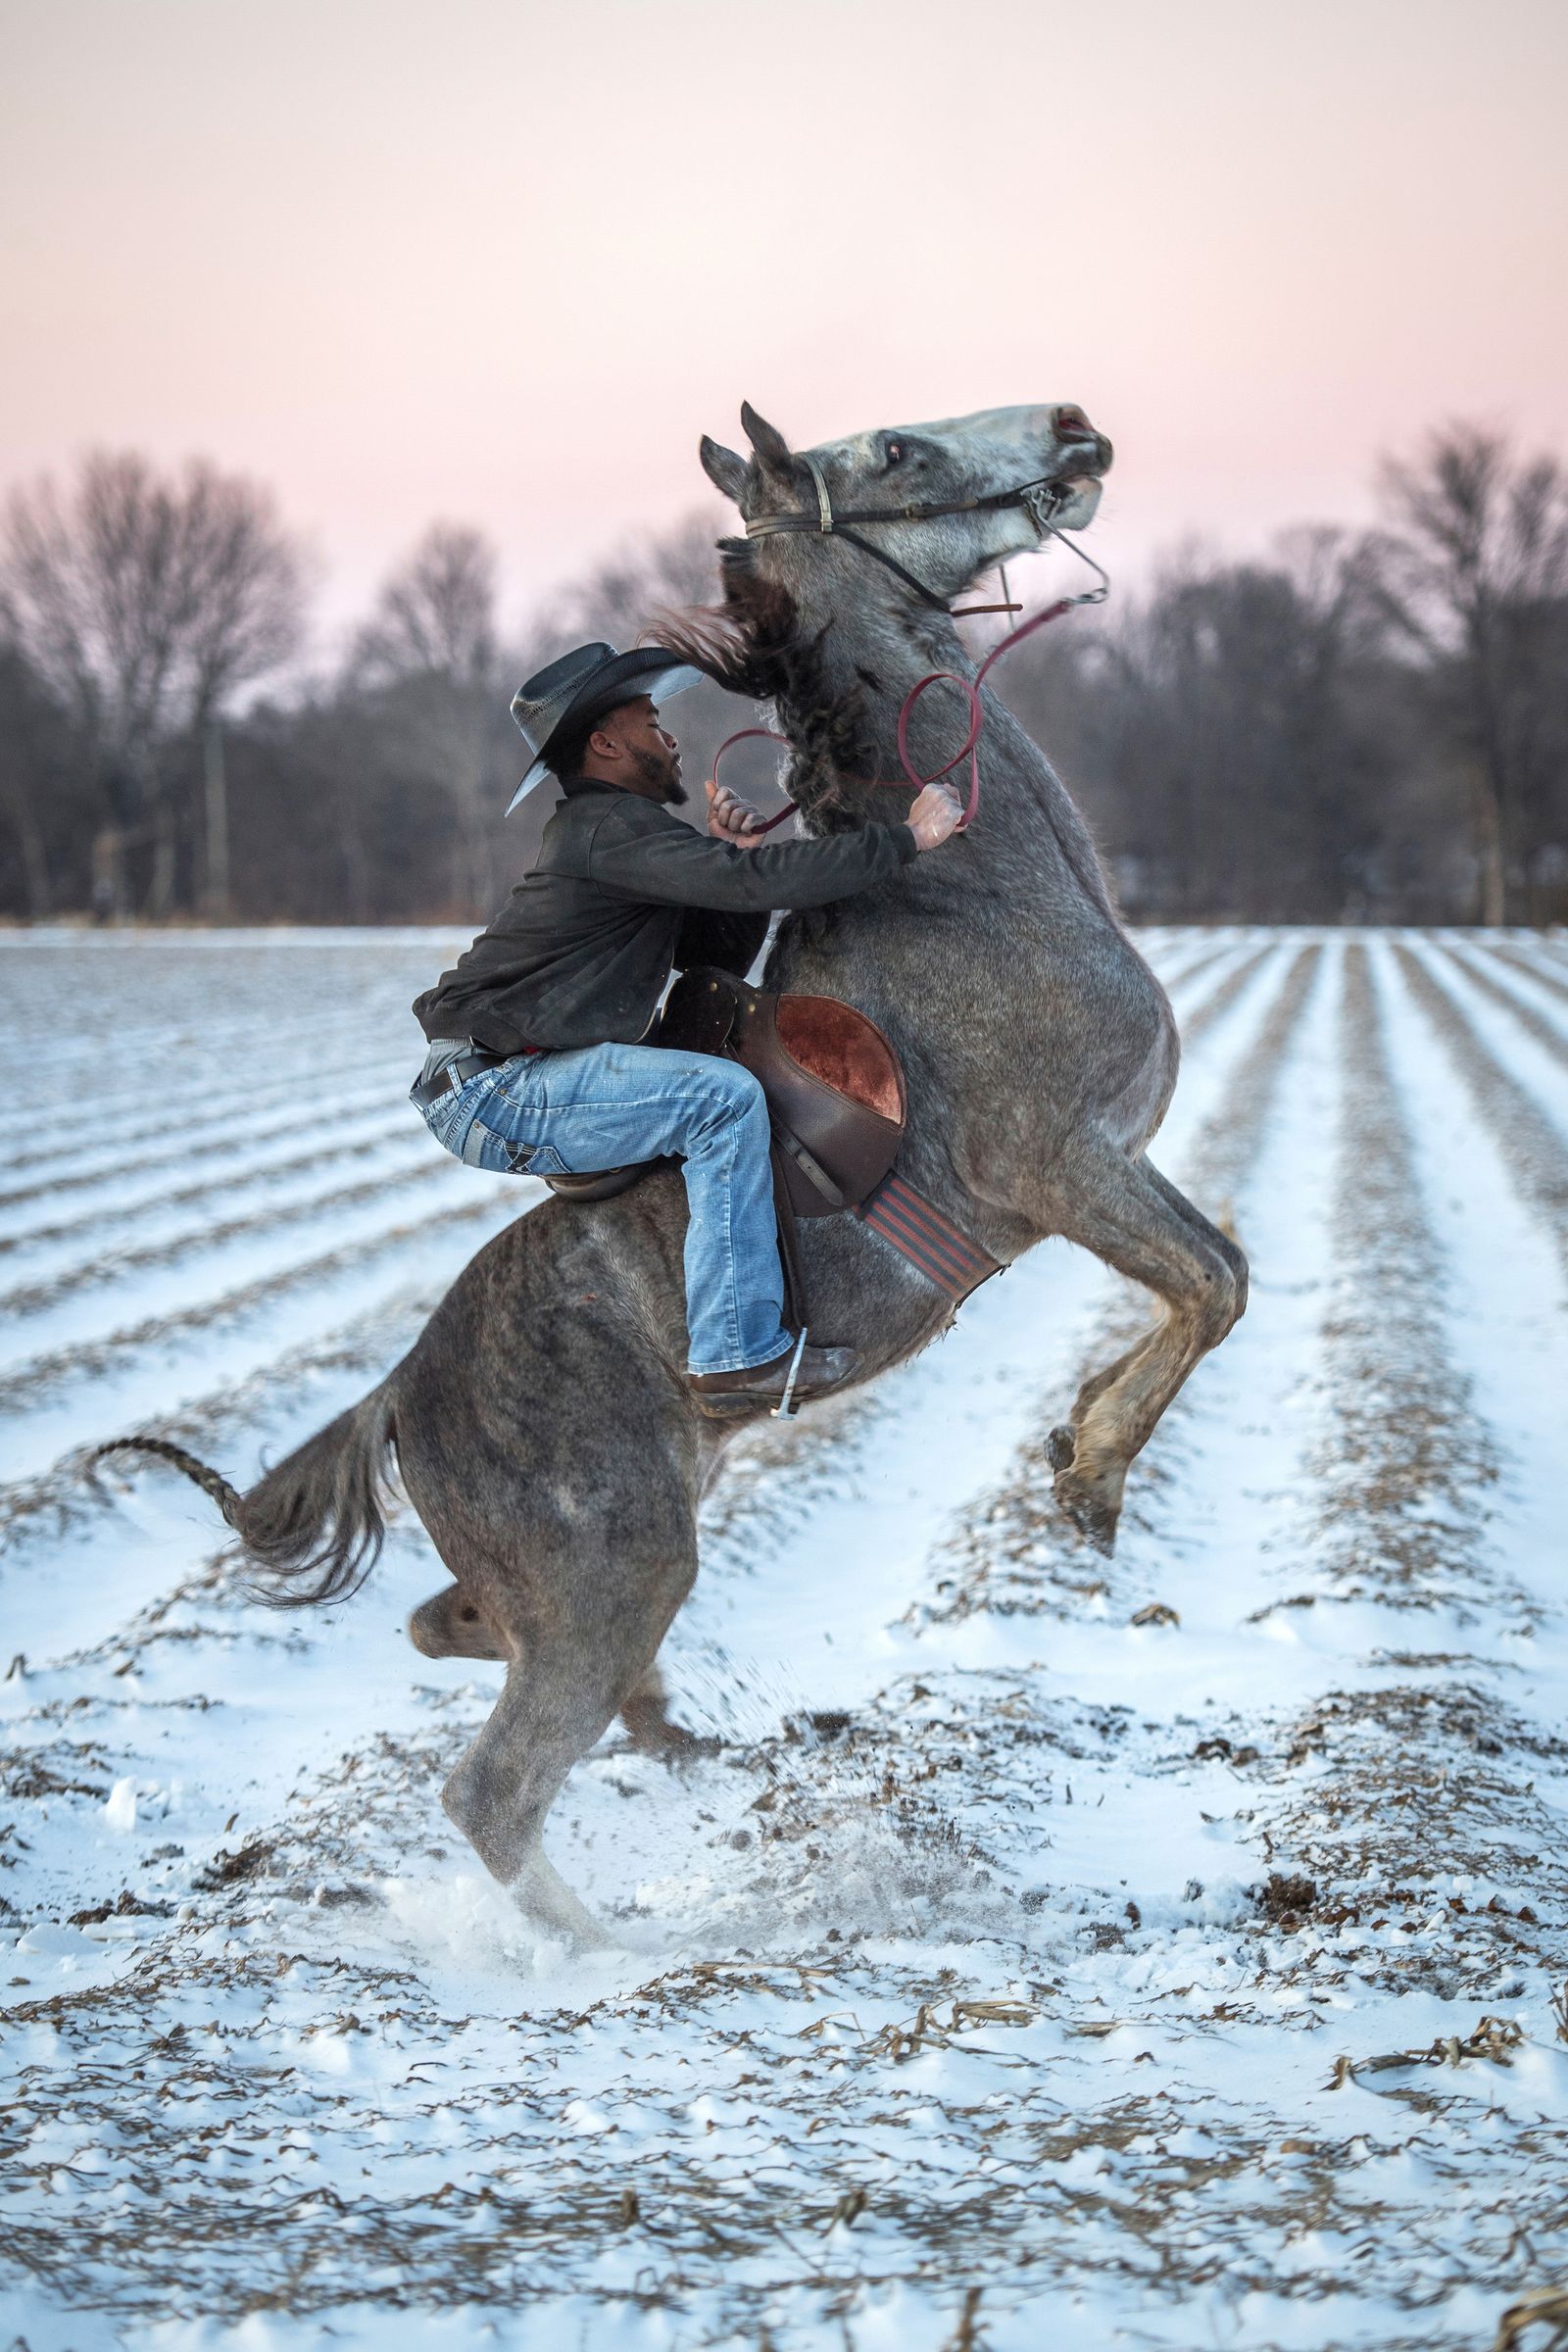 © Rory Doyle - Gee McGee rears his horse after a rare snowfall in Bolivar County, Mississippi on Jan. 16, 2018.